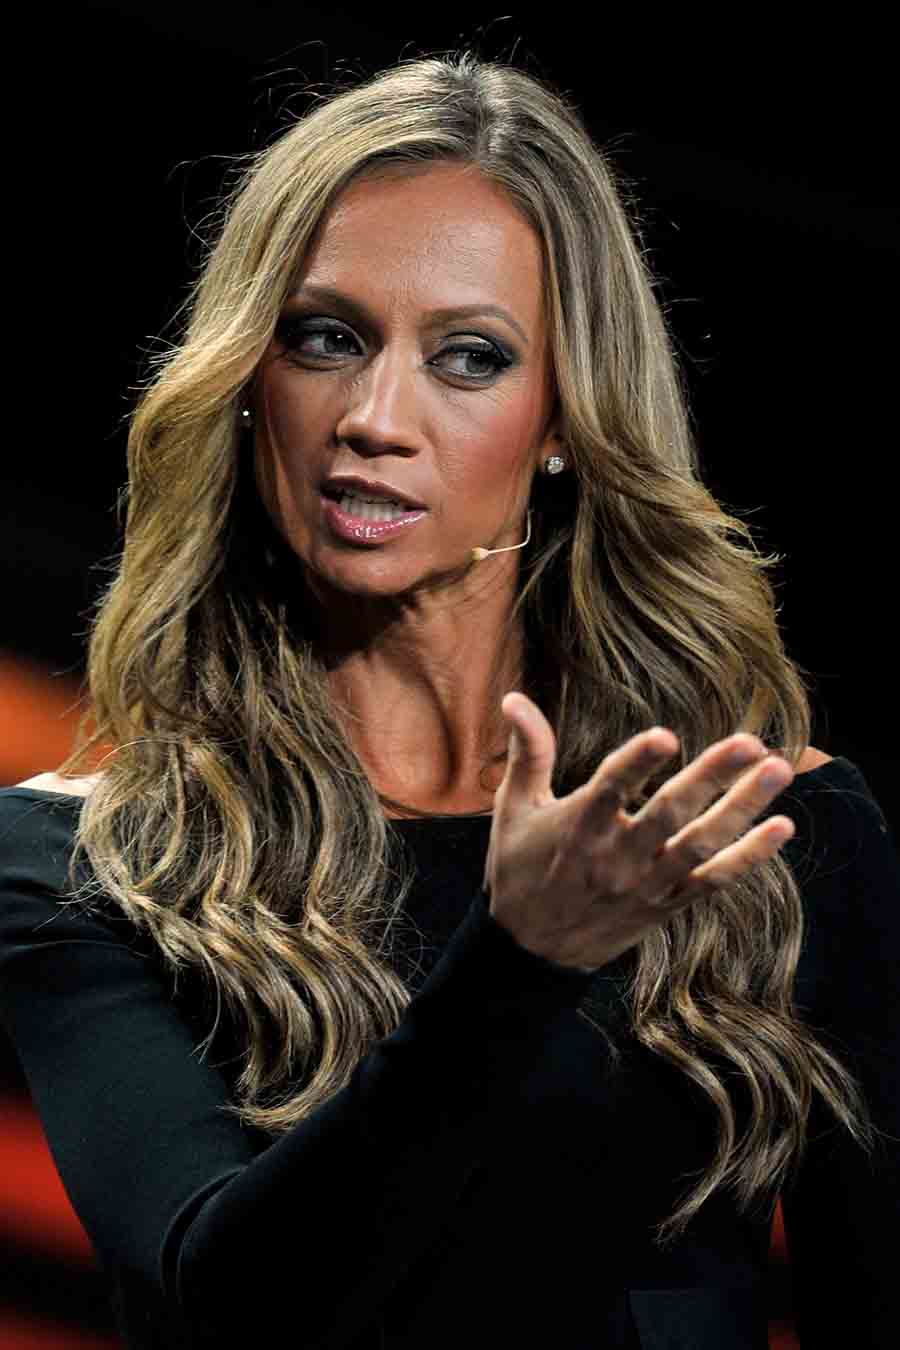 Kate Abdo: For sports fanatics in India, Abdo’s talents are only accessible through YouTube clips or clumsily edited montages on Twitter. But even those snippets are enough to demonstrate the chutzpah which Abdo brings to the table. As an anchor, Abdo is not content with asking experts what they think about the game. She is bold and brilliant enough to add her own insights, without assuming an authority that is not entitled to a non-player. For her composure in handling tricky football debates, her biting wit and, above all, her fantastic chemistry with her panellists, particularly Thierry Henry, we score Abdo a 9 out of 10